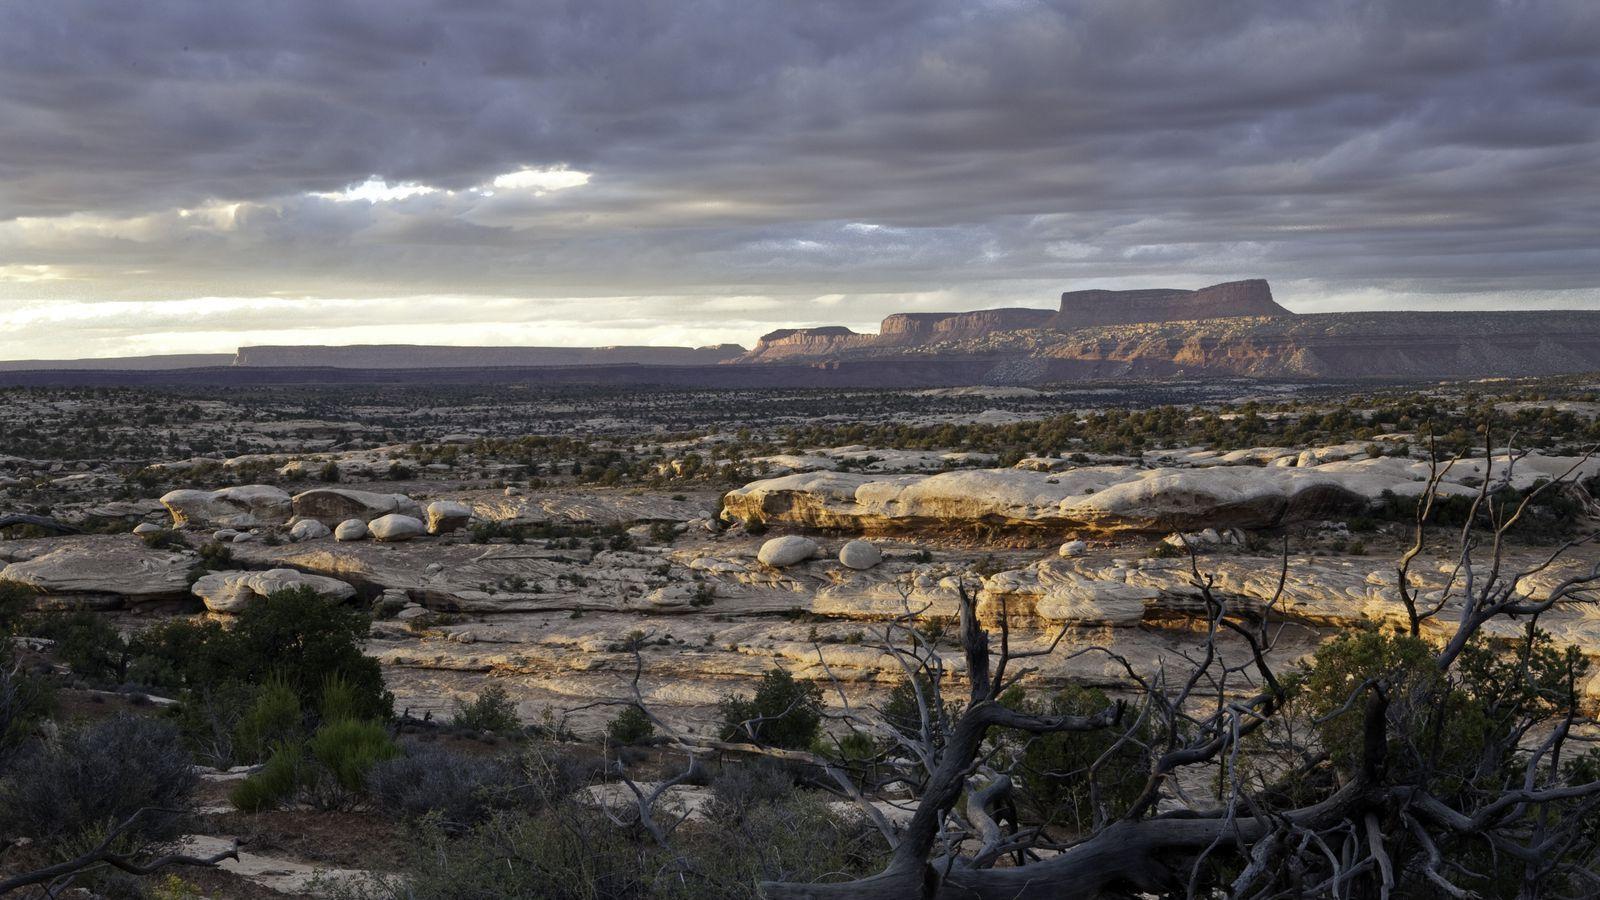 President Obama creates two controversial national monuments